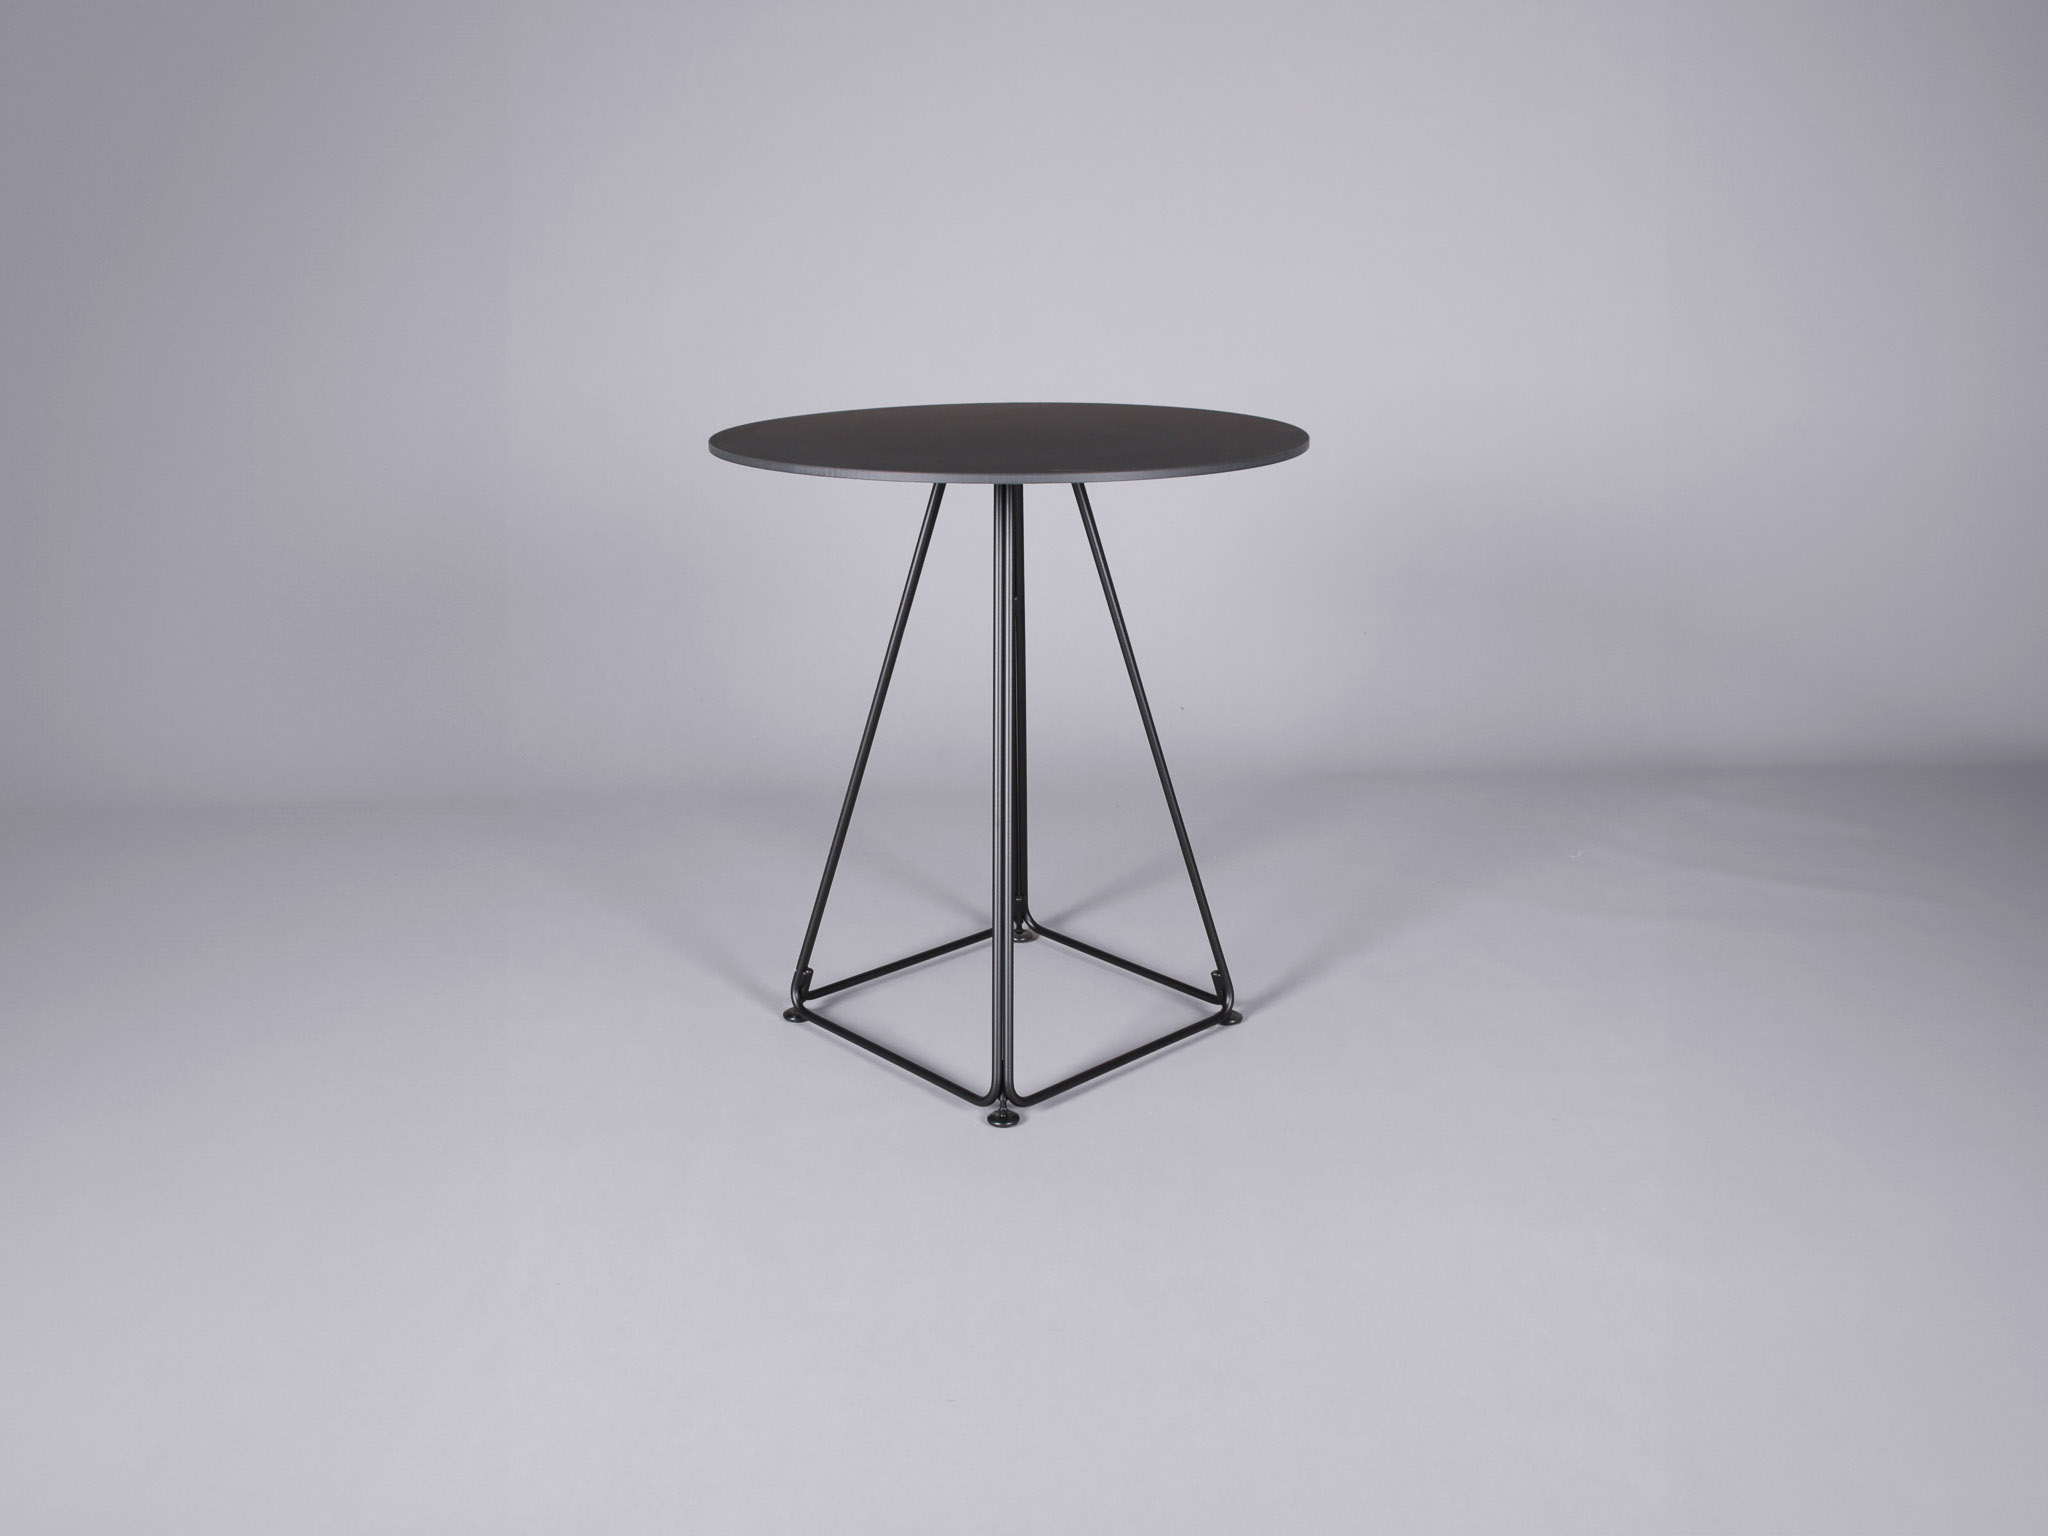 This bistro table pairs effortlessly with an industrial chair for an urban look or with a velvet dining chair for a more upscale feel.